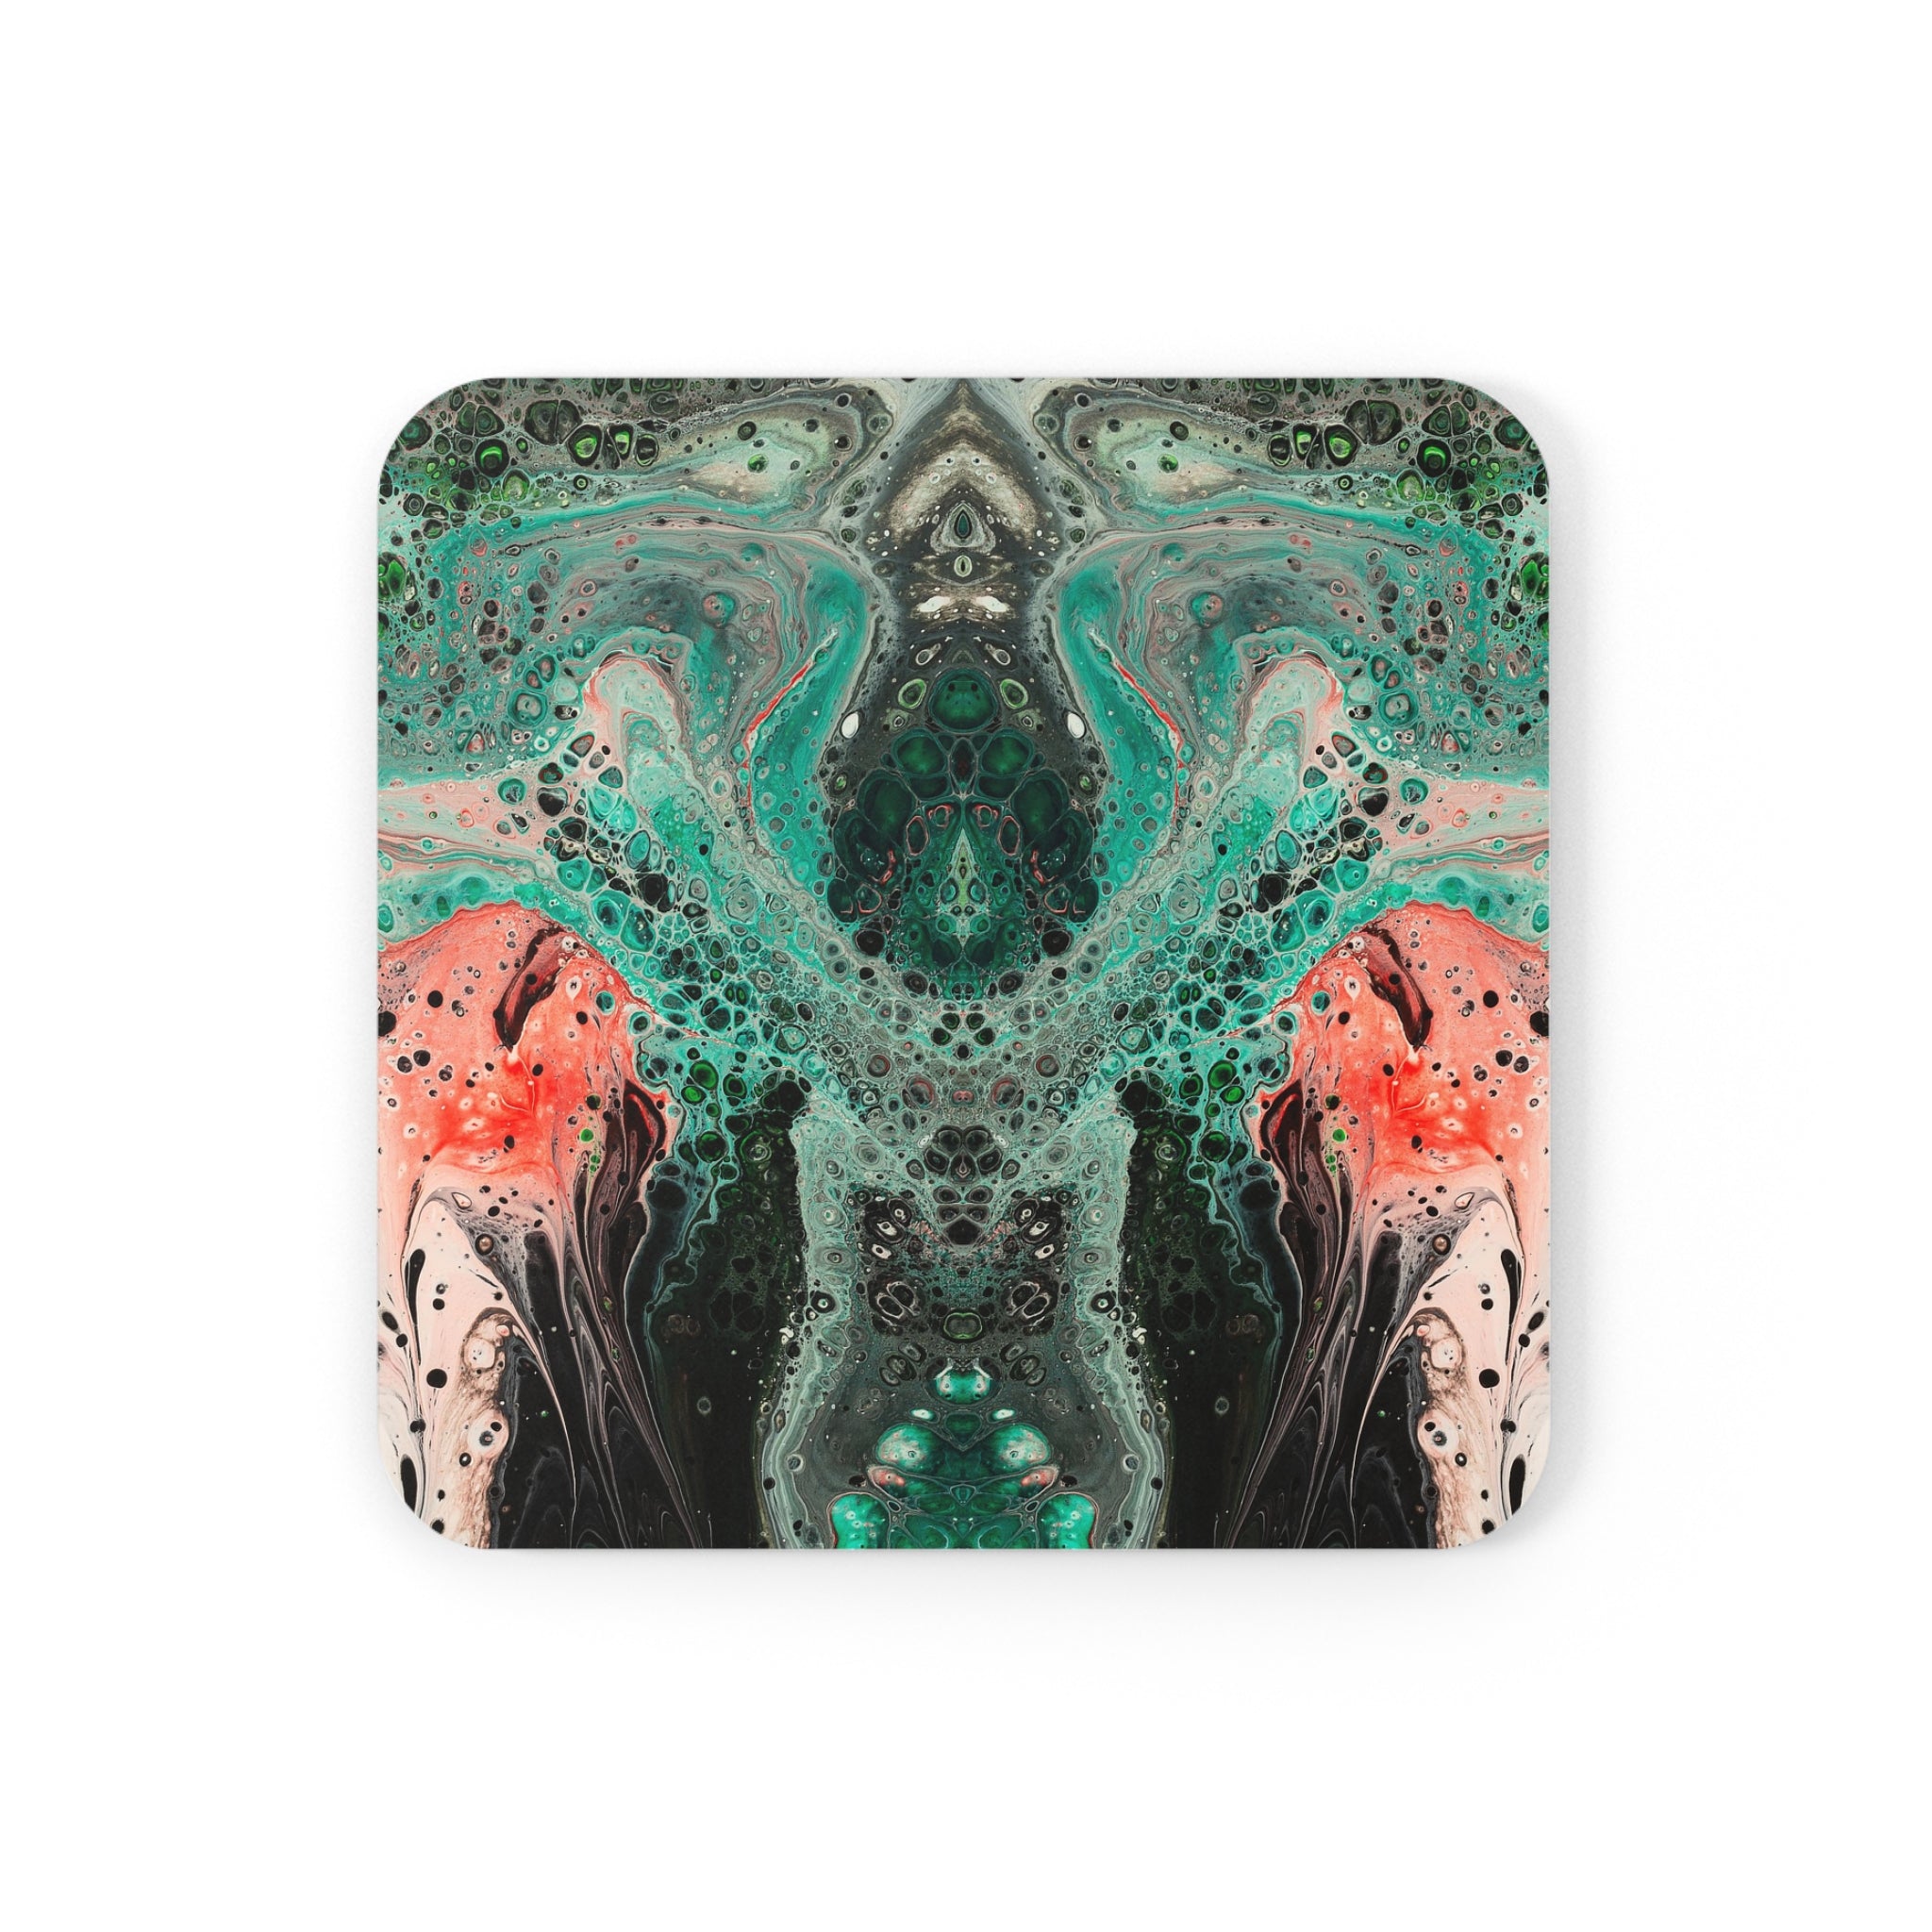 Cameron Creations - Funky Fish - Stylish Coffee Coaster - Square Front